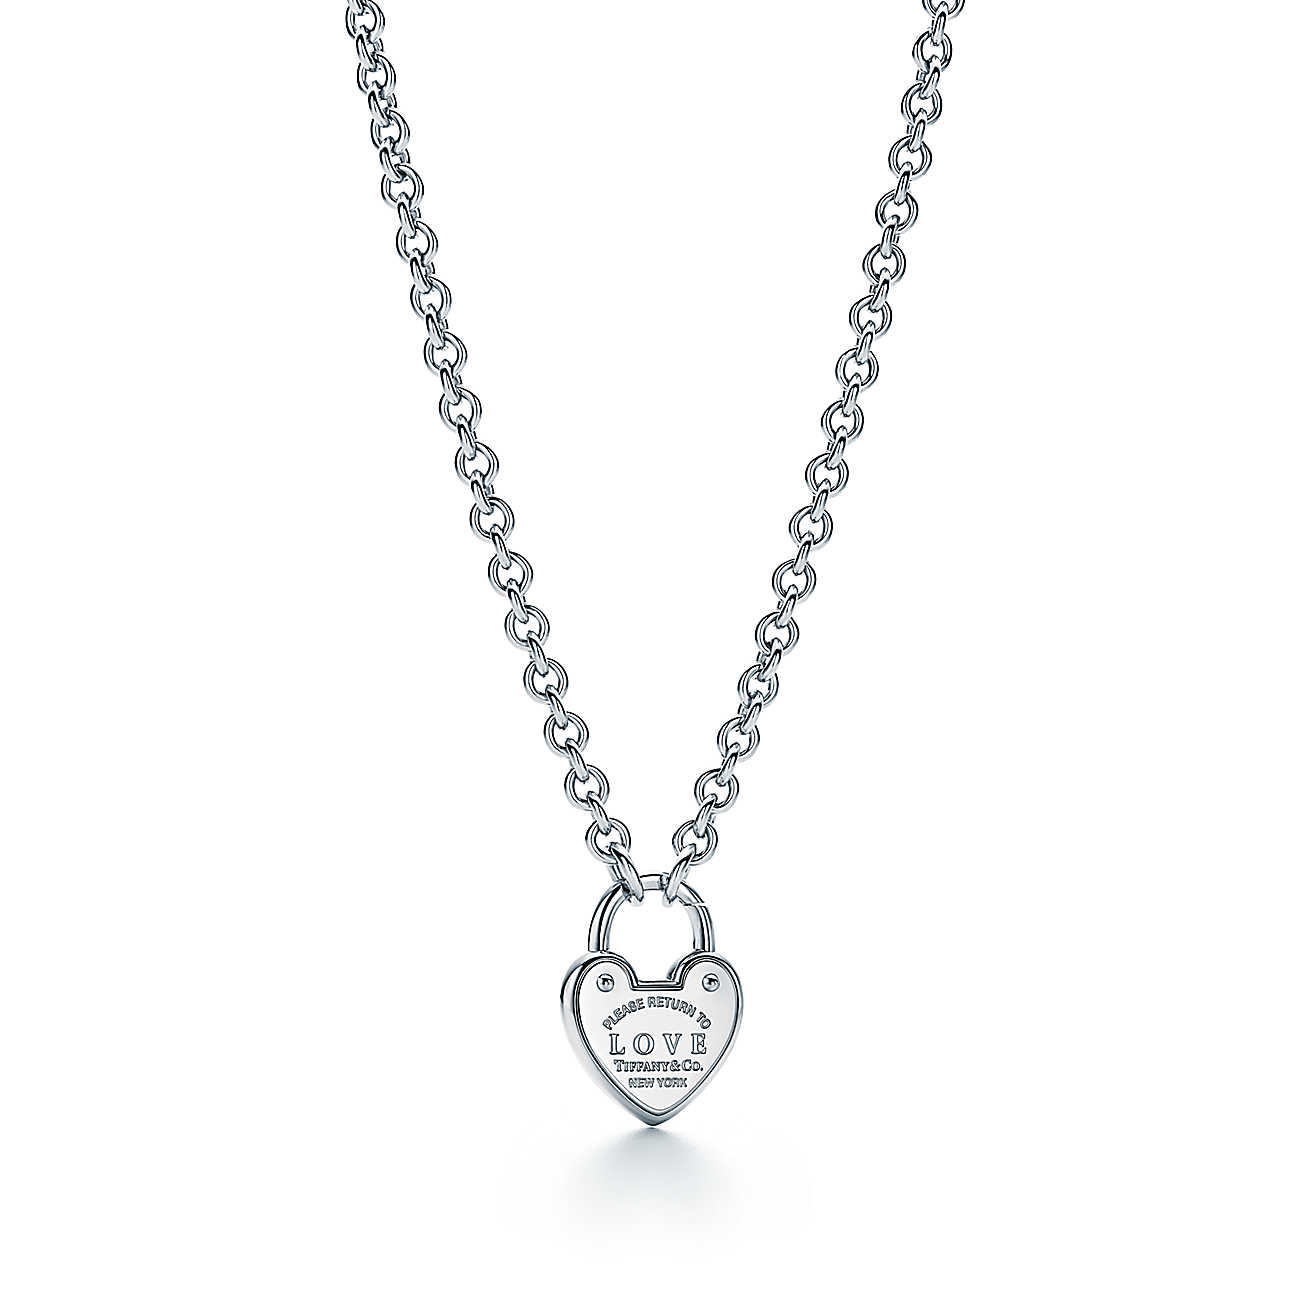 Tiffany Necklaces Under 200
 Return to Tiffany™ Love lock necklace in sterling silver